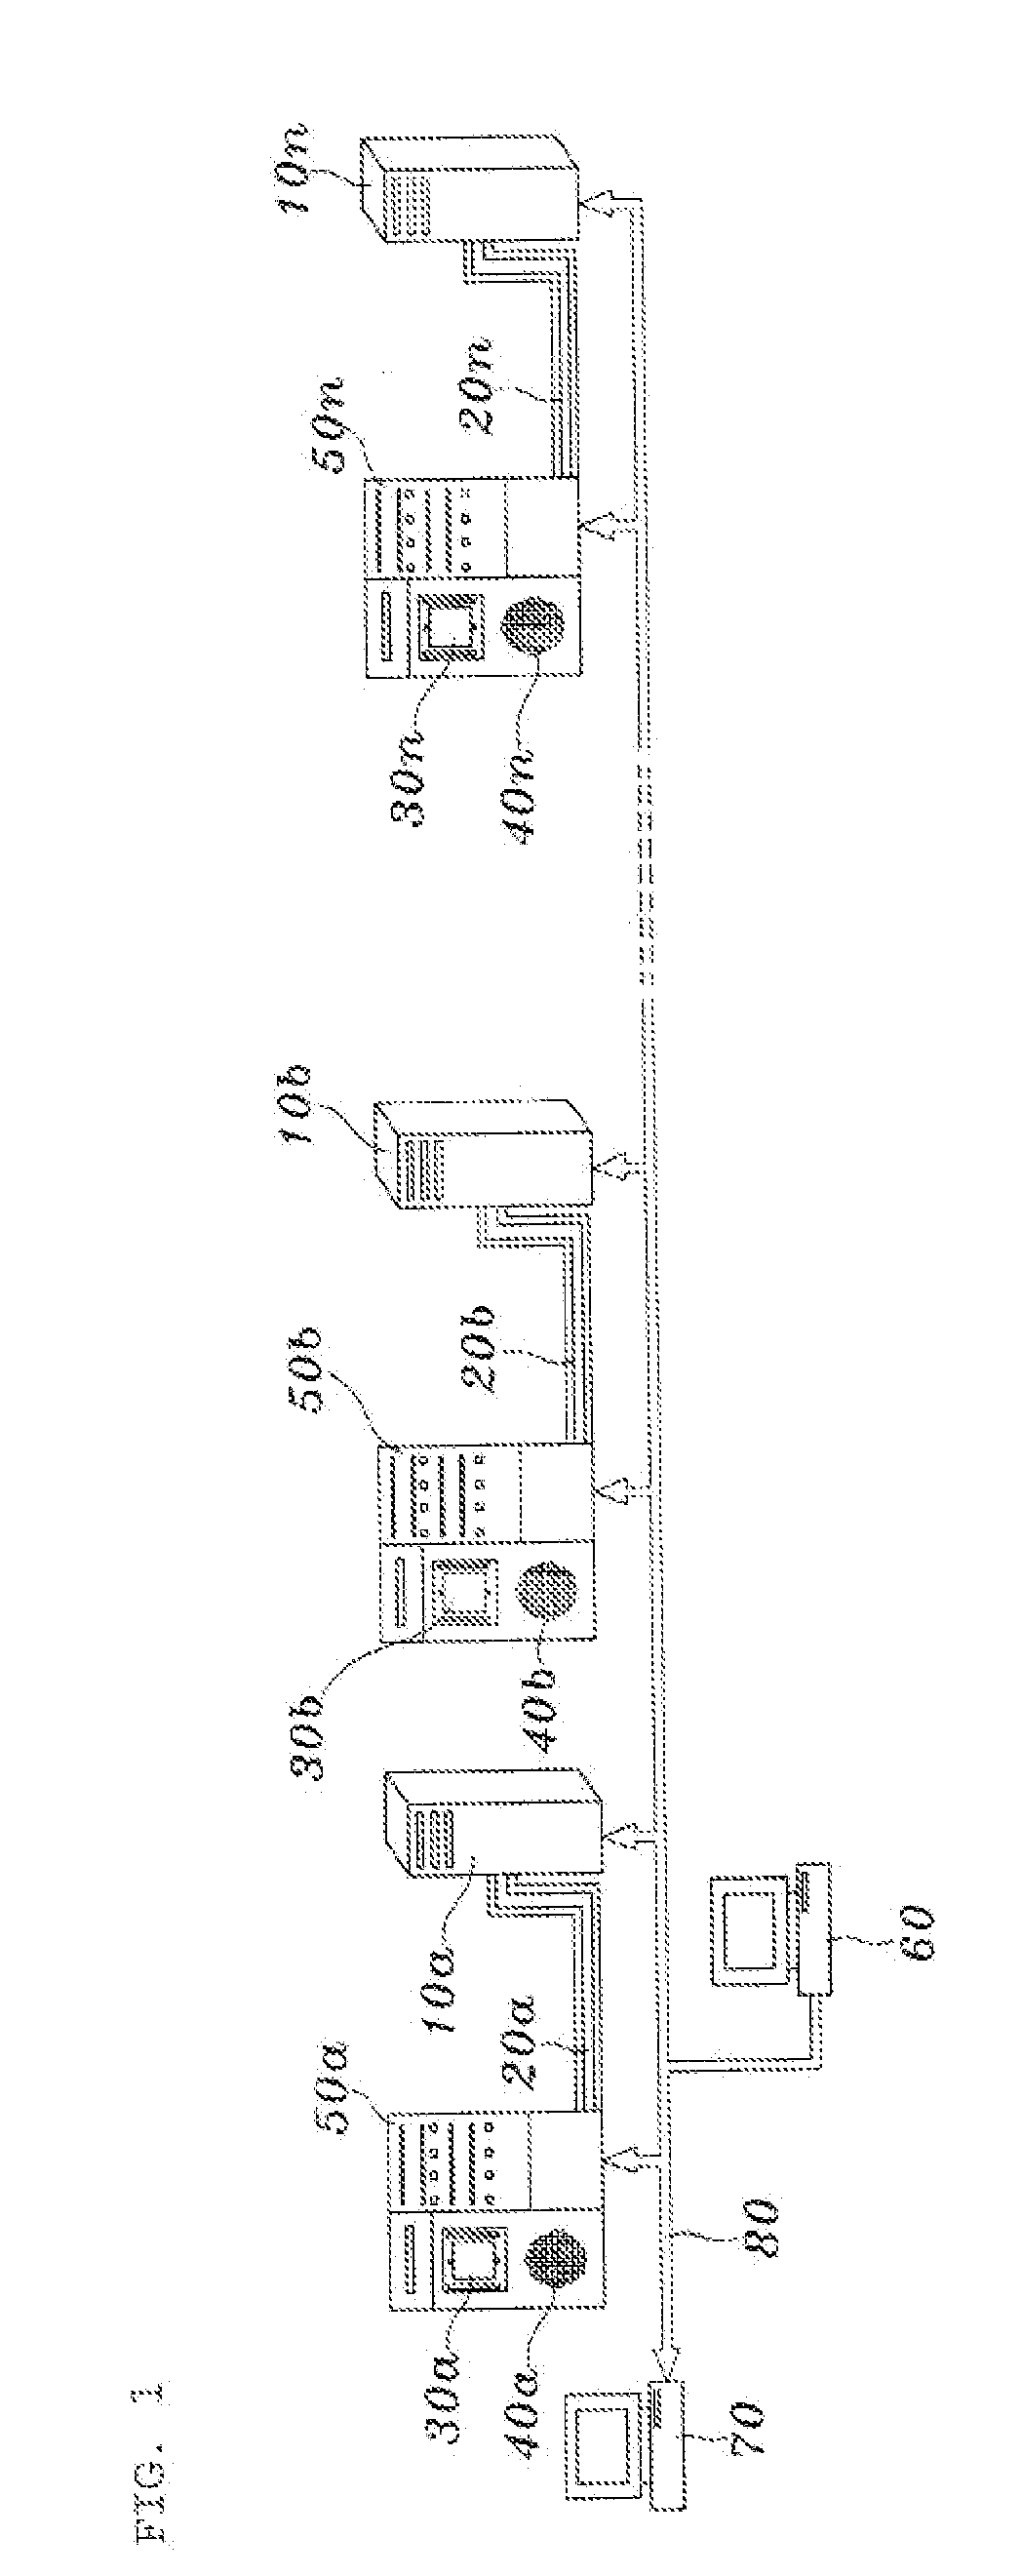 System for accumulating exposure energy information of wafer and management method of mask for exposure utilizing exposure energy information of wafer accumulated with the system